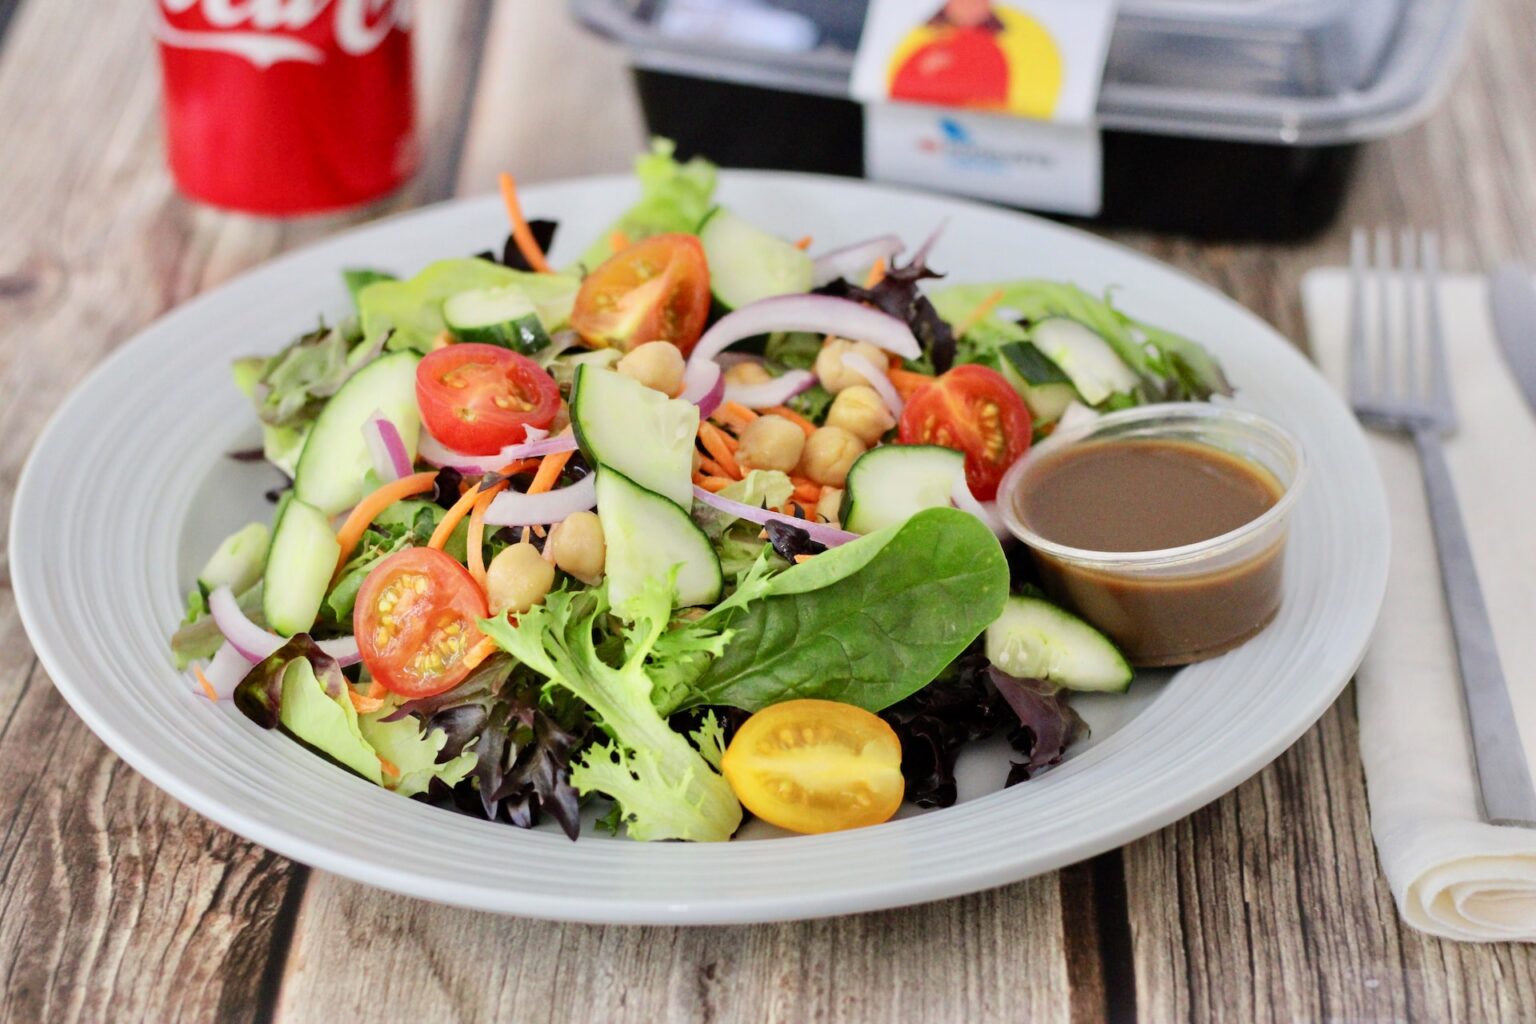 Dressings Can Take Your Salad To The Next Level